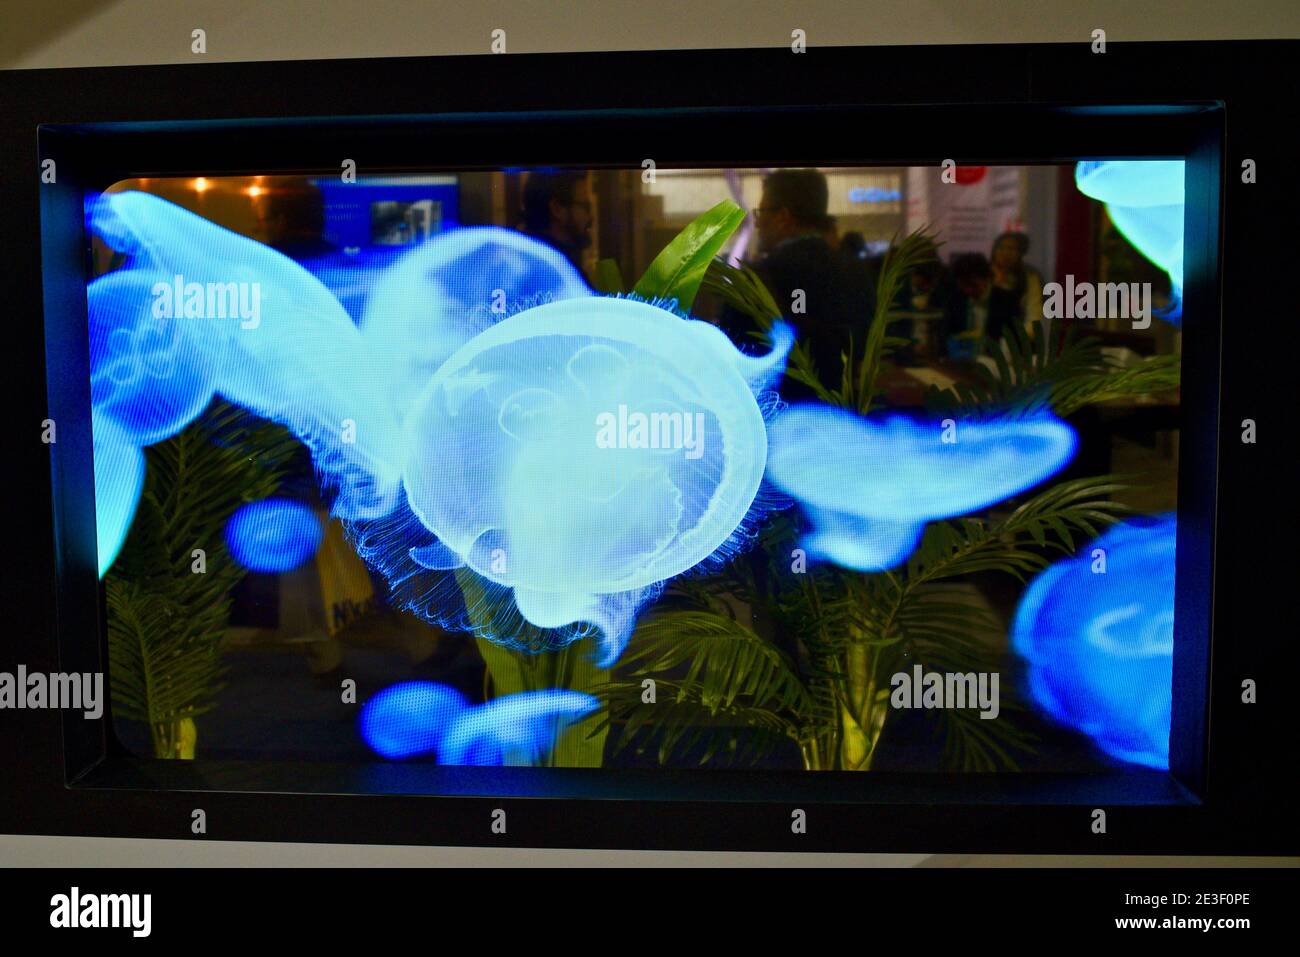 Panasonic transparent OLED glass display module, showcased in exhibit booth at CES, world's largest trade show Las Vegas, NV, USA Stock Photo